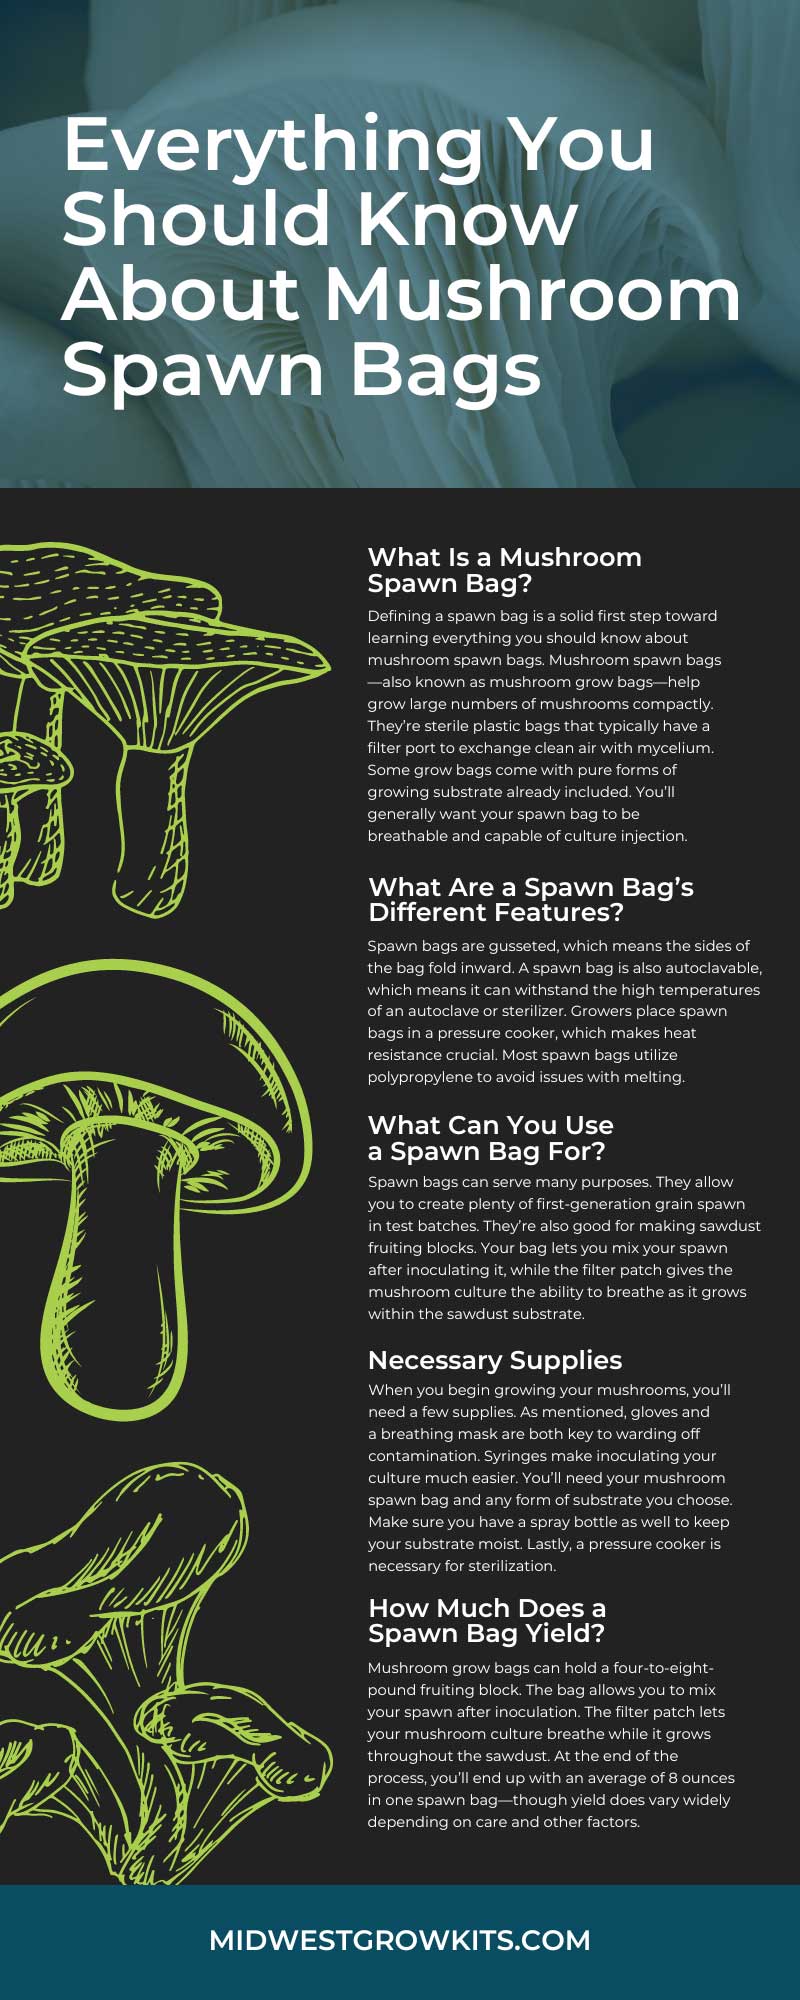 Mushroom Spawn Bags: Suppliers Shipping to Where You Are – Fungi Ally